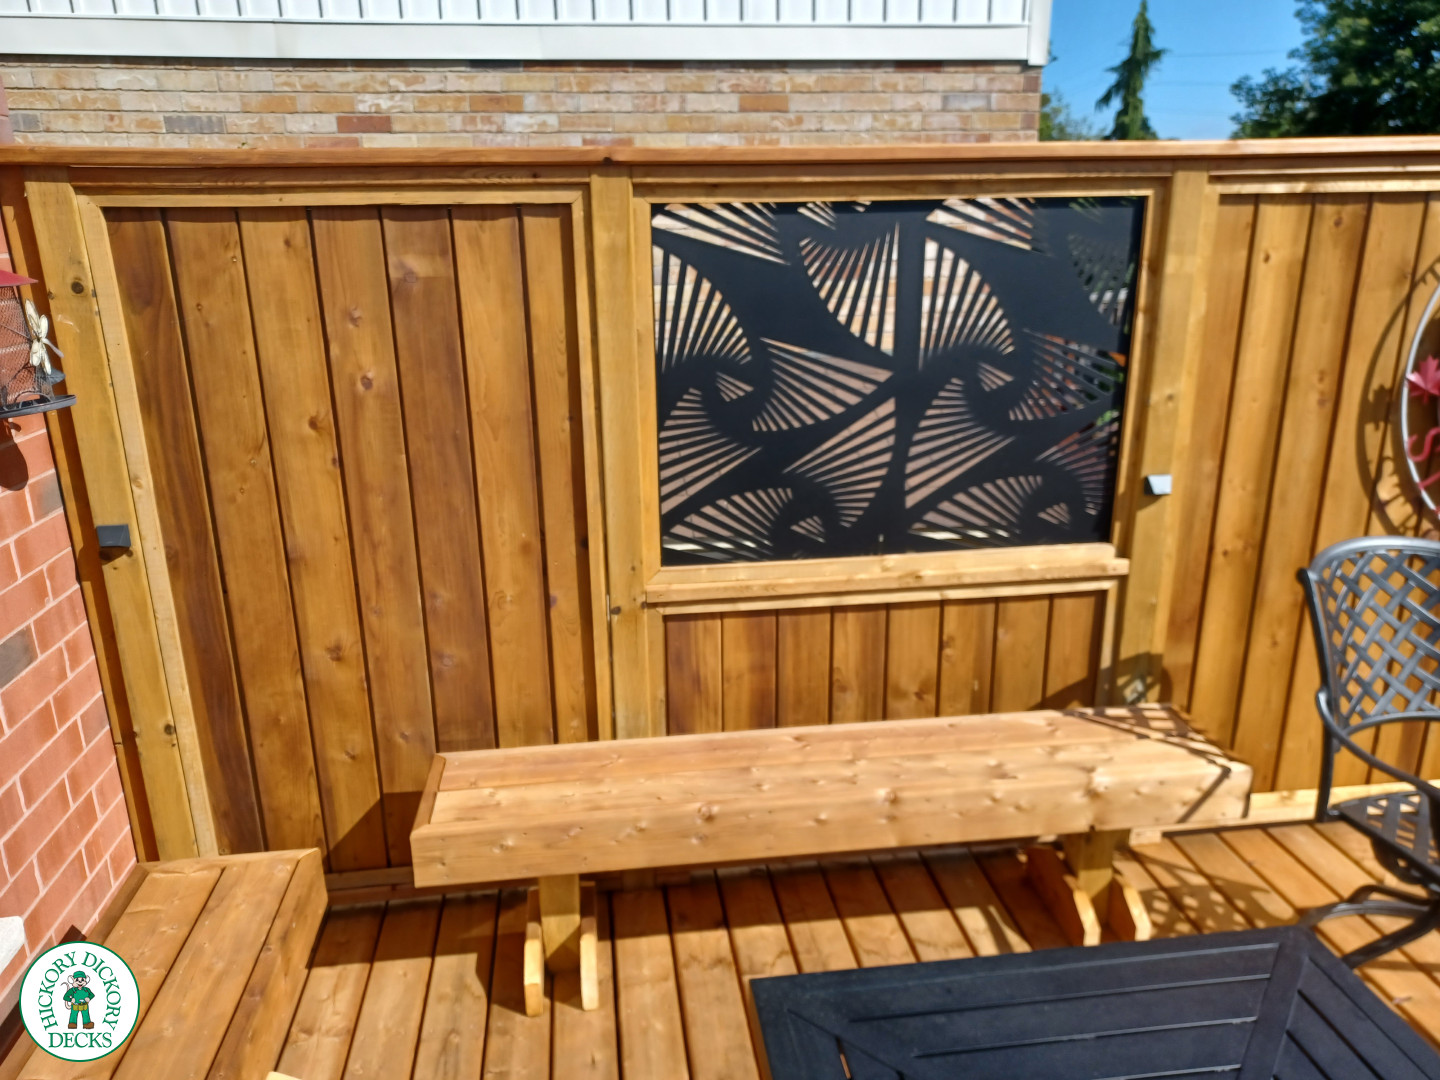 Mid rise pressure treated deck with glass railings, steps, and a custom cedar privacy screen